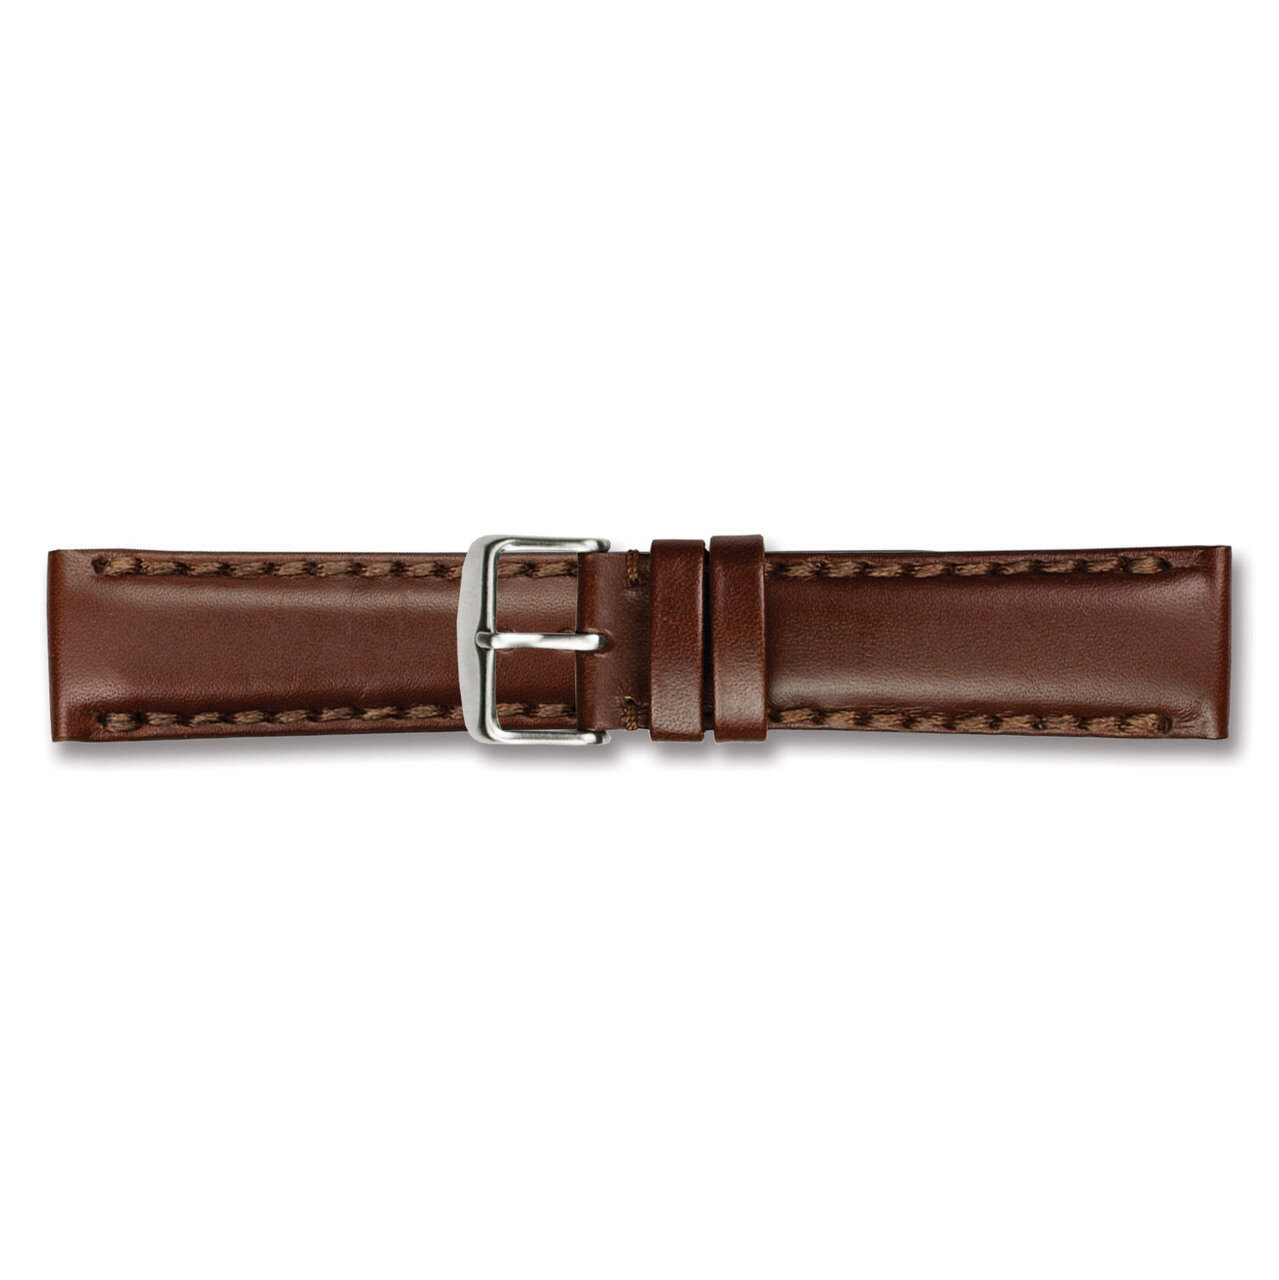 18mm Brown Oil Leather Watch Band 7.5 Inch Silver-tone Buckle BAW322-18